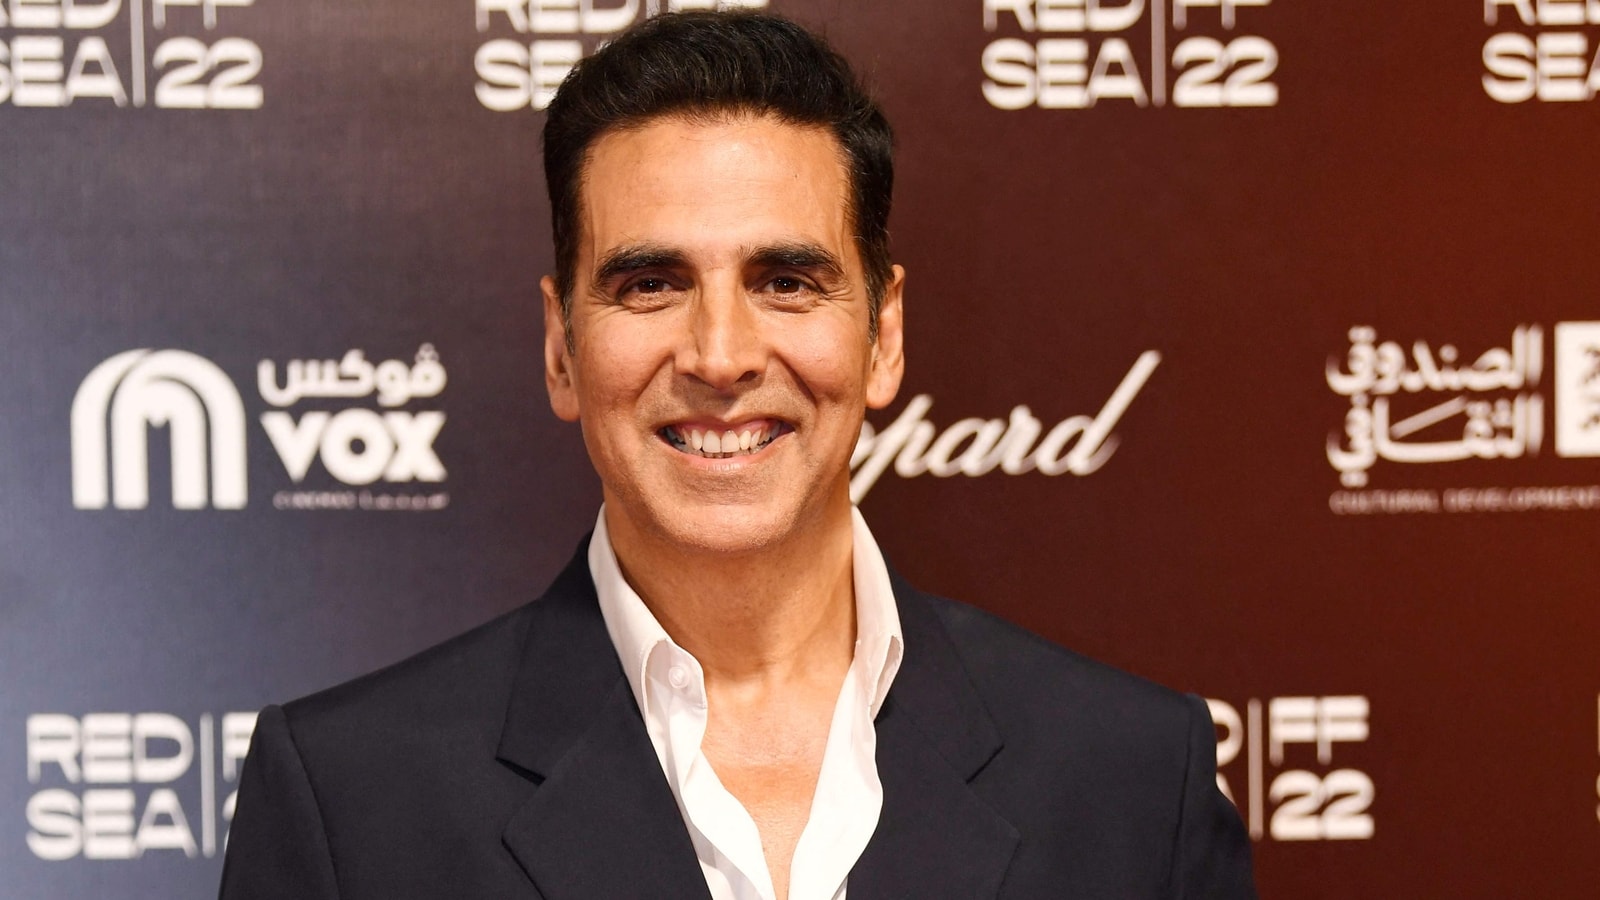 Akshay Kumar’s subsequent mission might be on intercourse training, actor confirms at Red Sea Film Festival